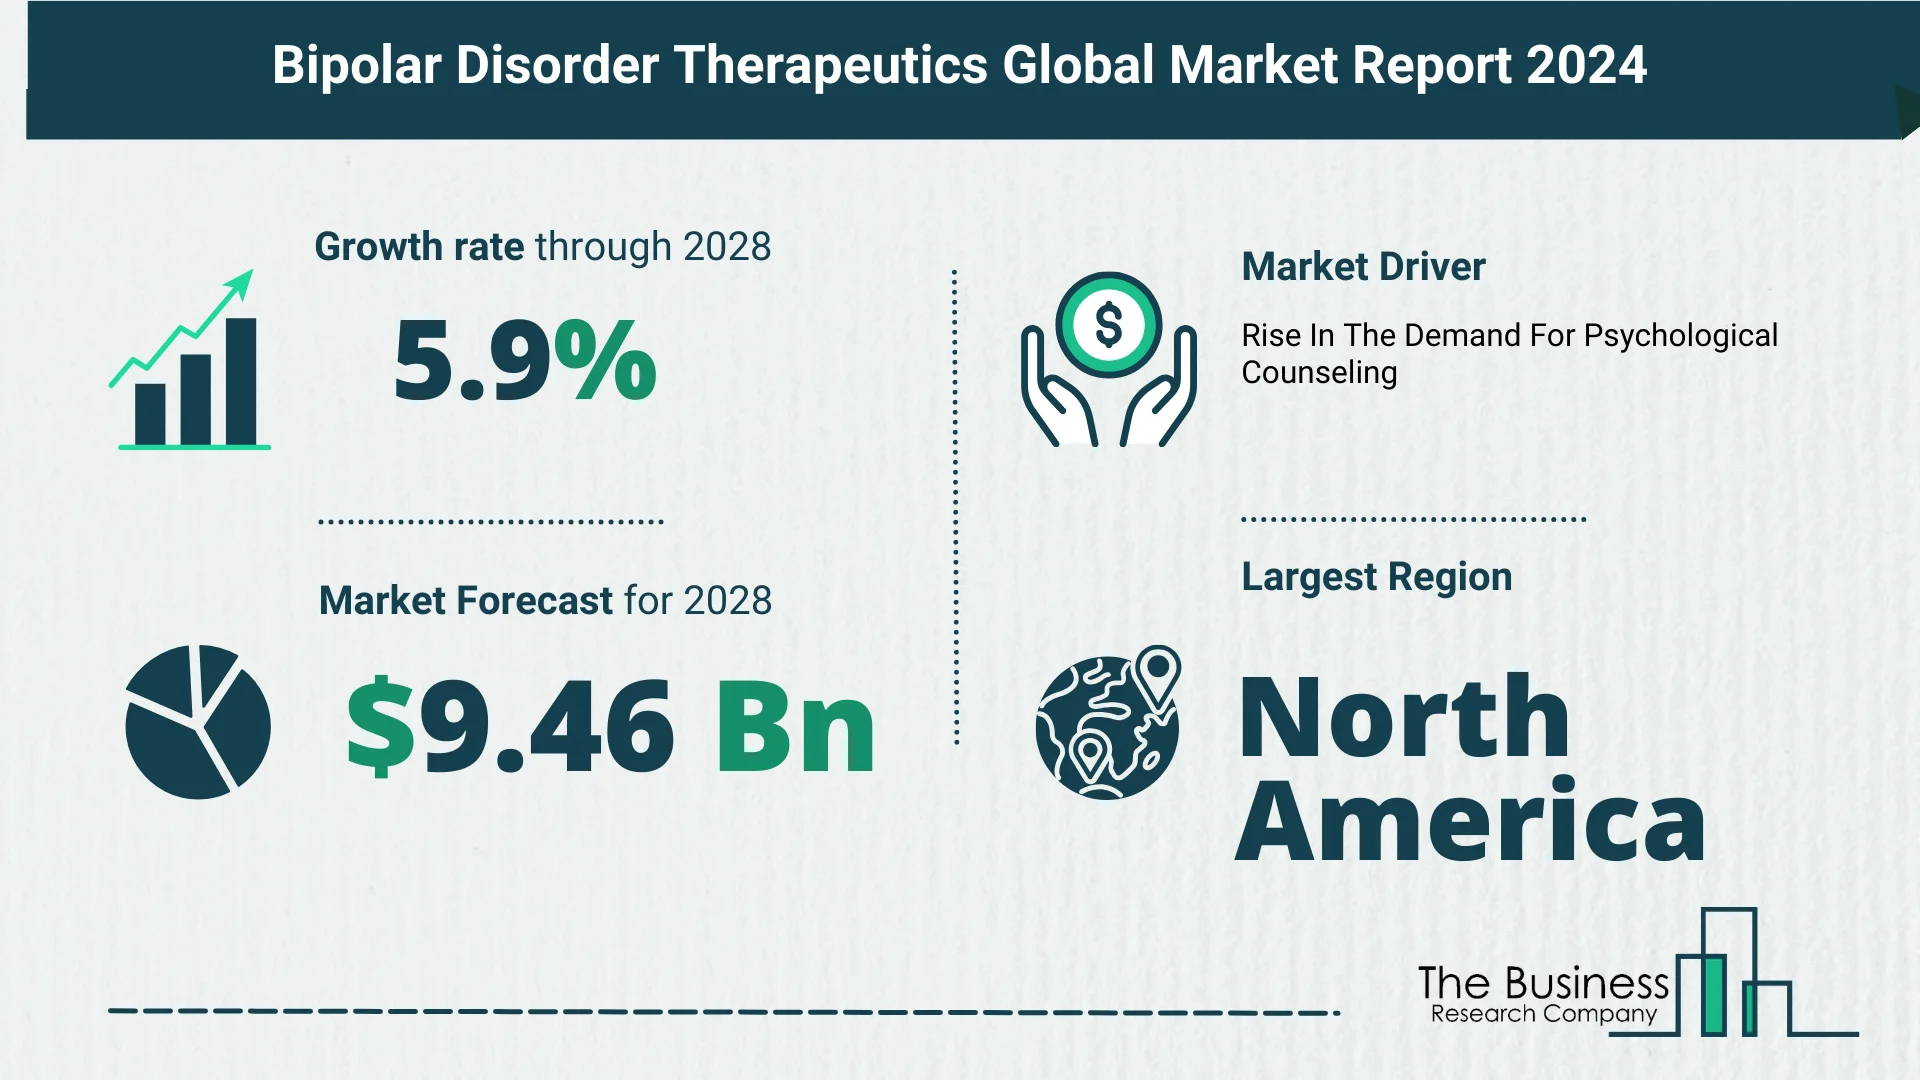 What Is The Forecast Growth Rate For The Bipolar Disorder Therapeutics Market?